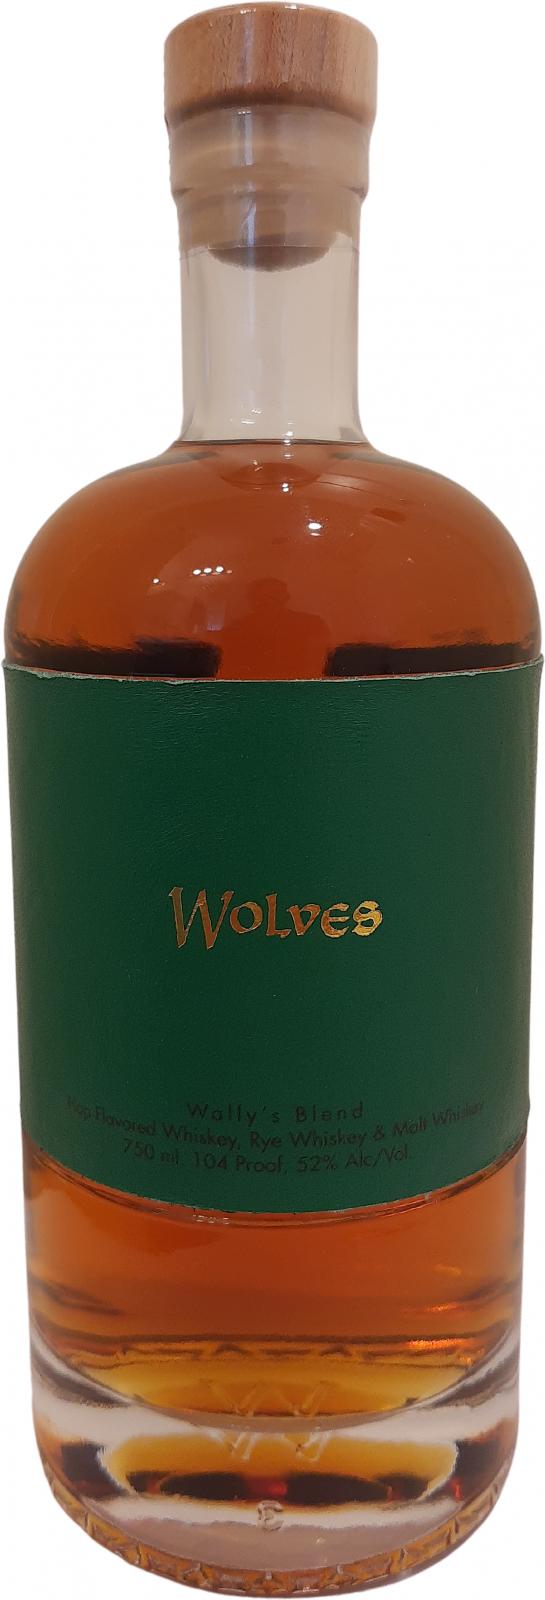 Wolves Wally's Blend